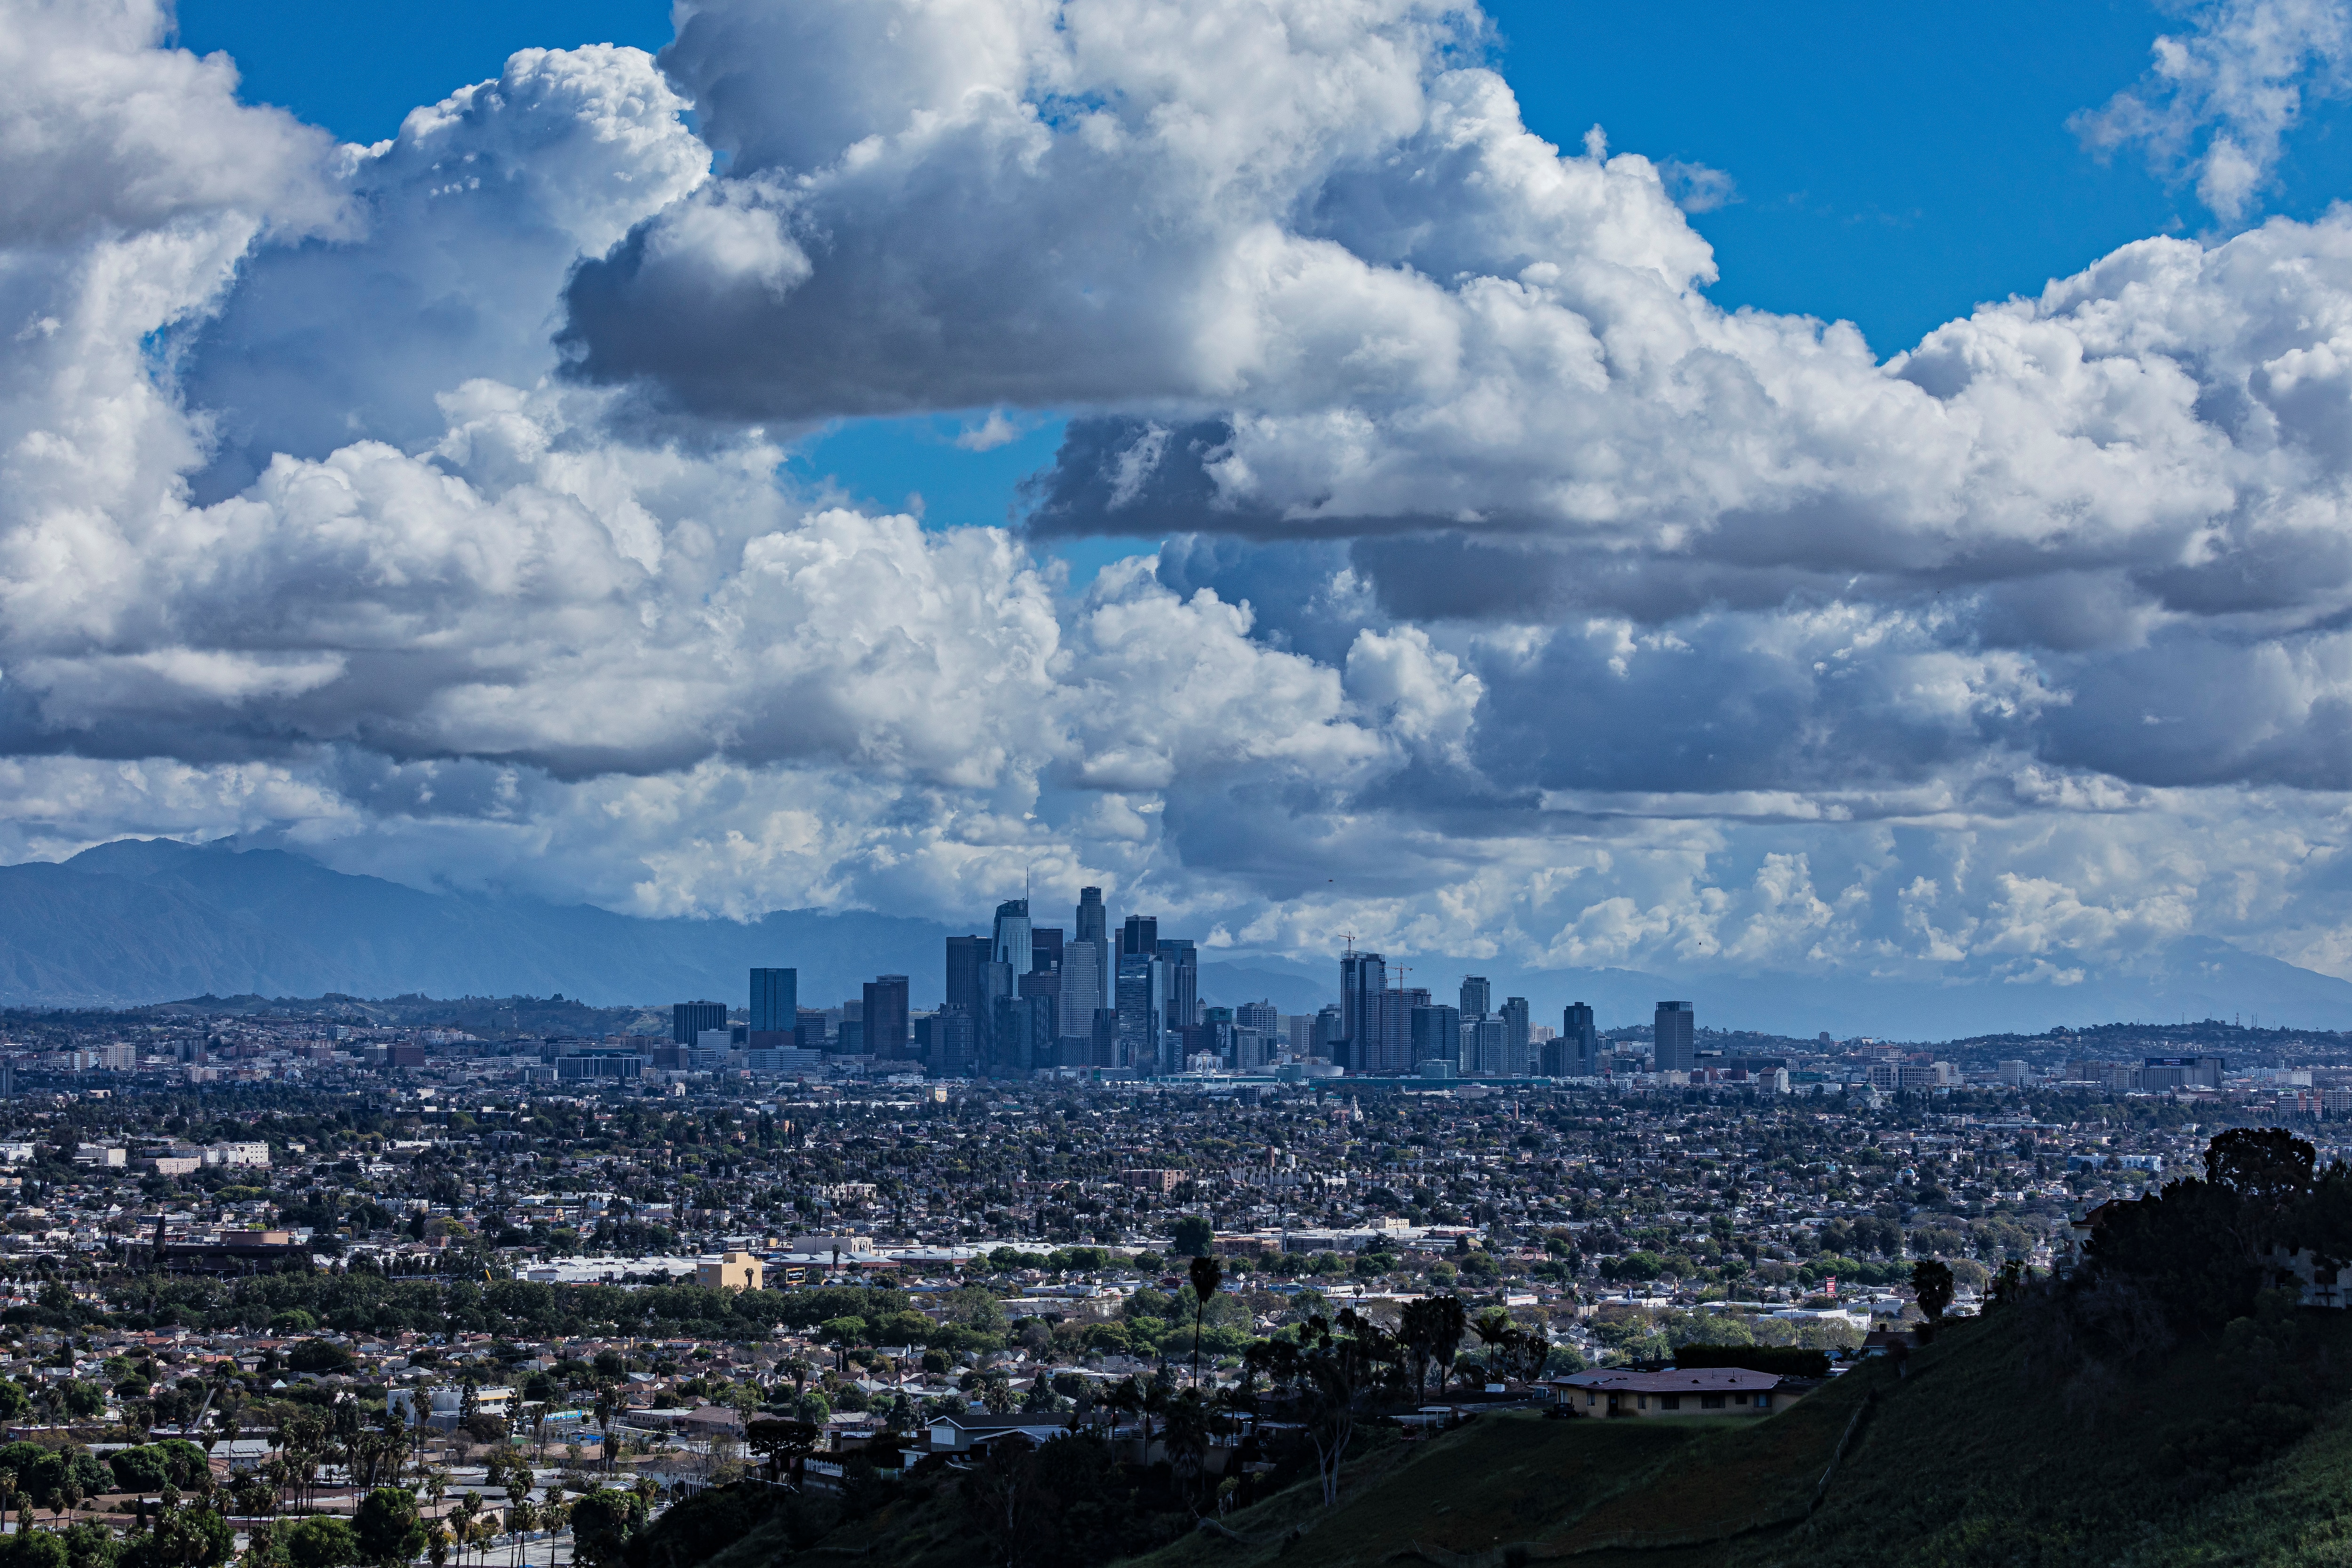 The skies above the city of Los Angeles are cleaner and clearer due to lower automobile use and less local manufacturing in the basin, 23rd March 2020.